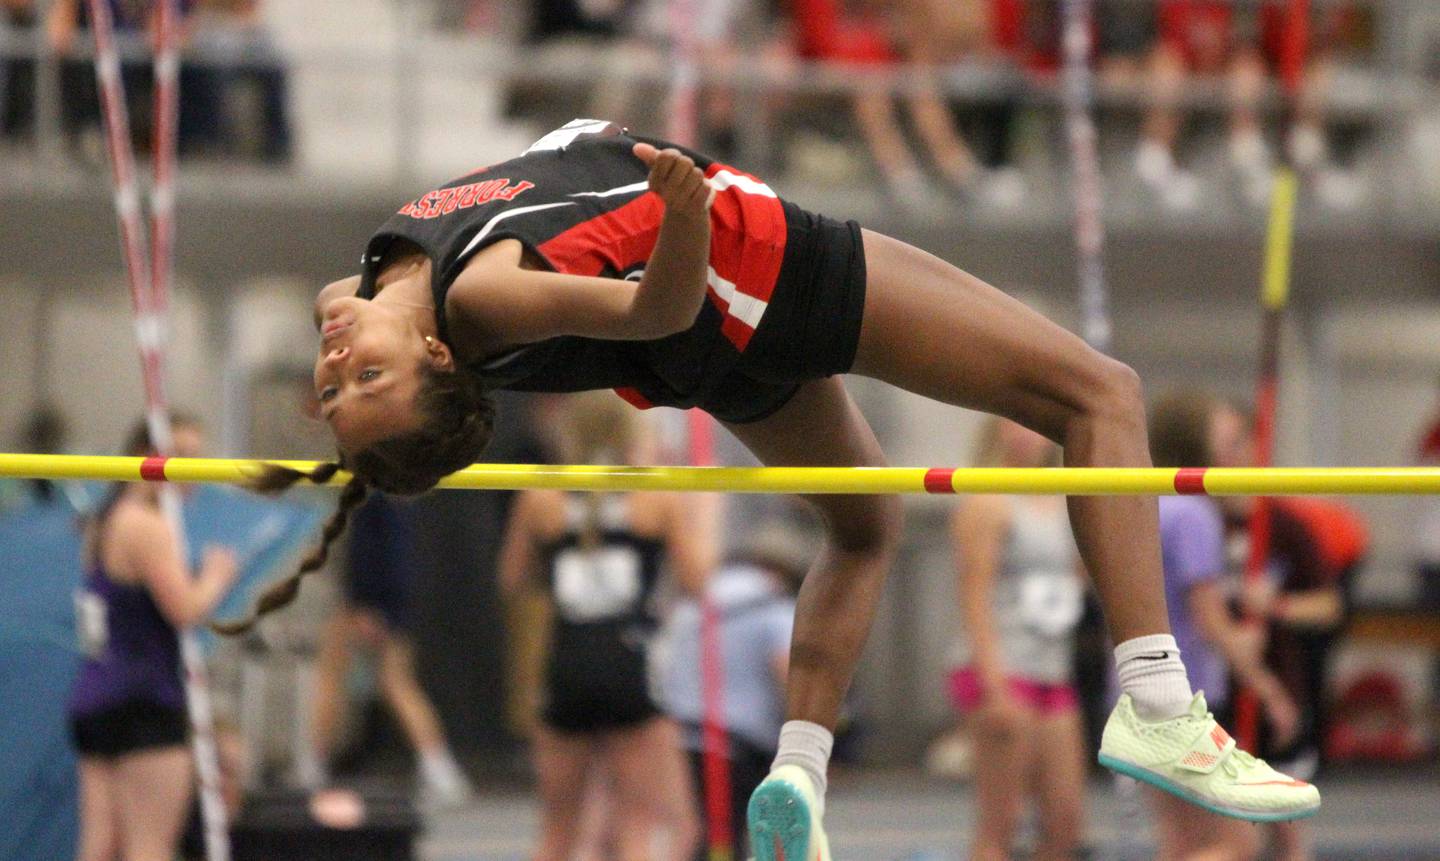 Forreston’s Letresse Buisker competes in the 1A high jump finals during the IHSA Girls State Championships in Charleston on Saturday, May 21, 2022.